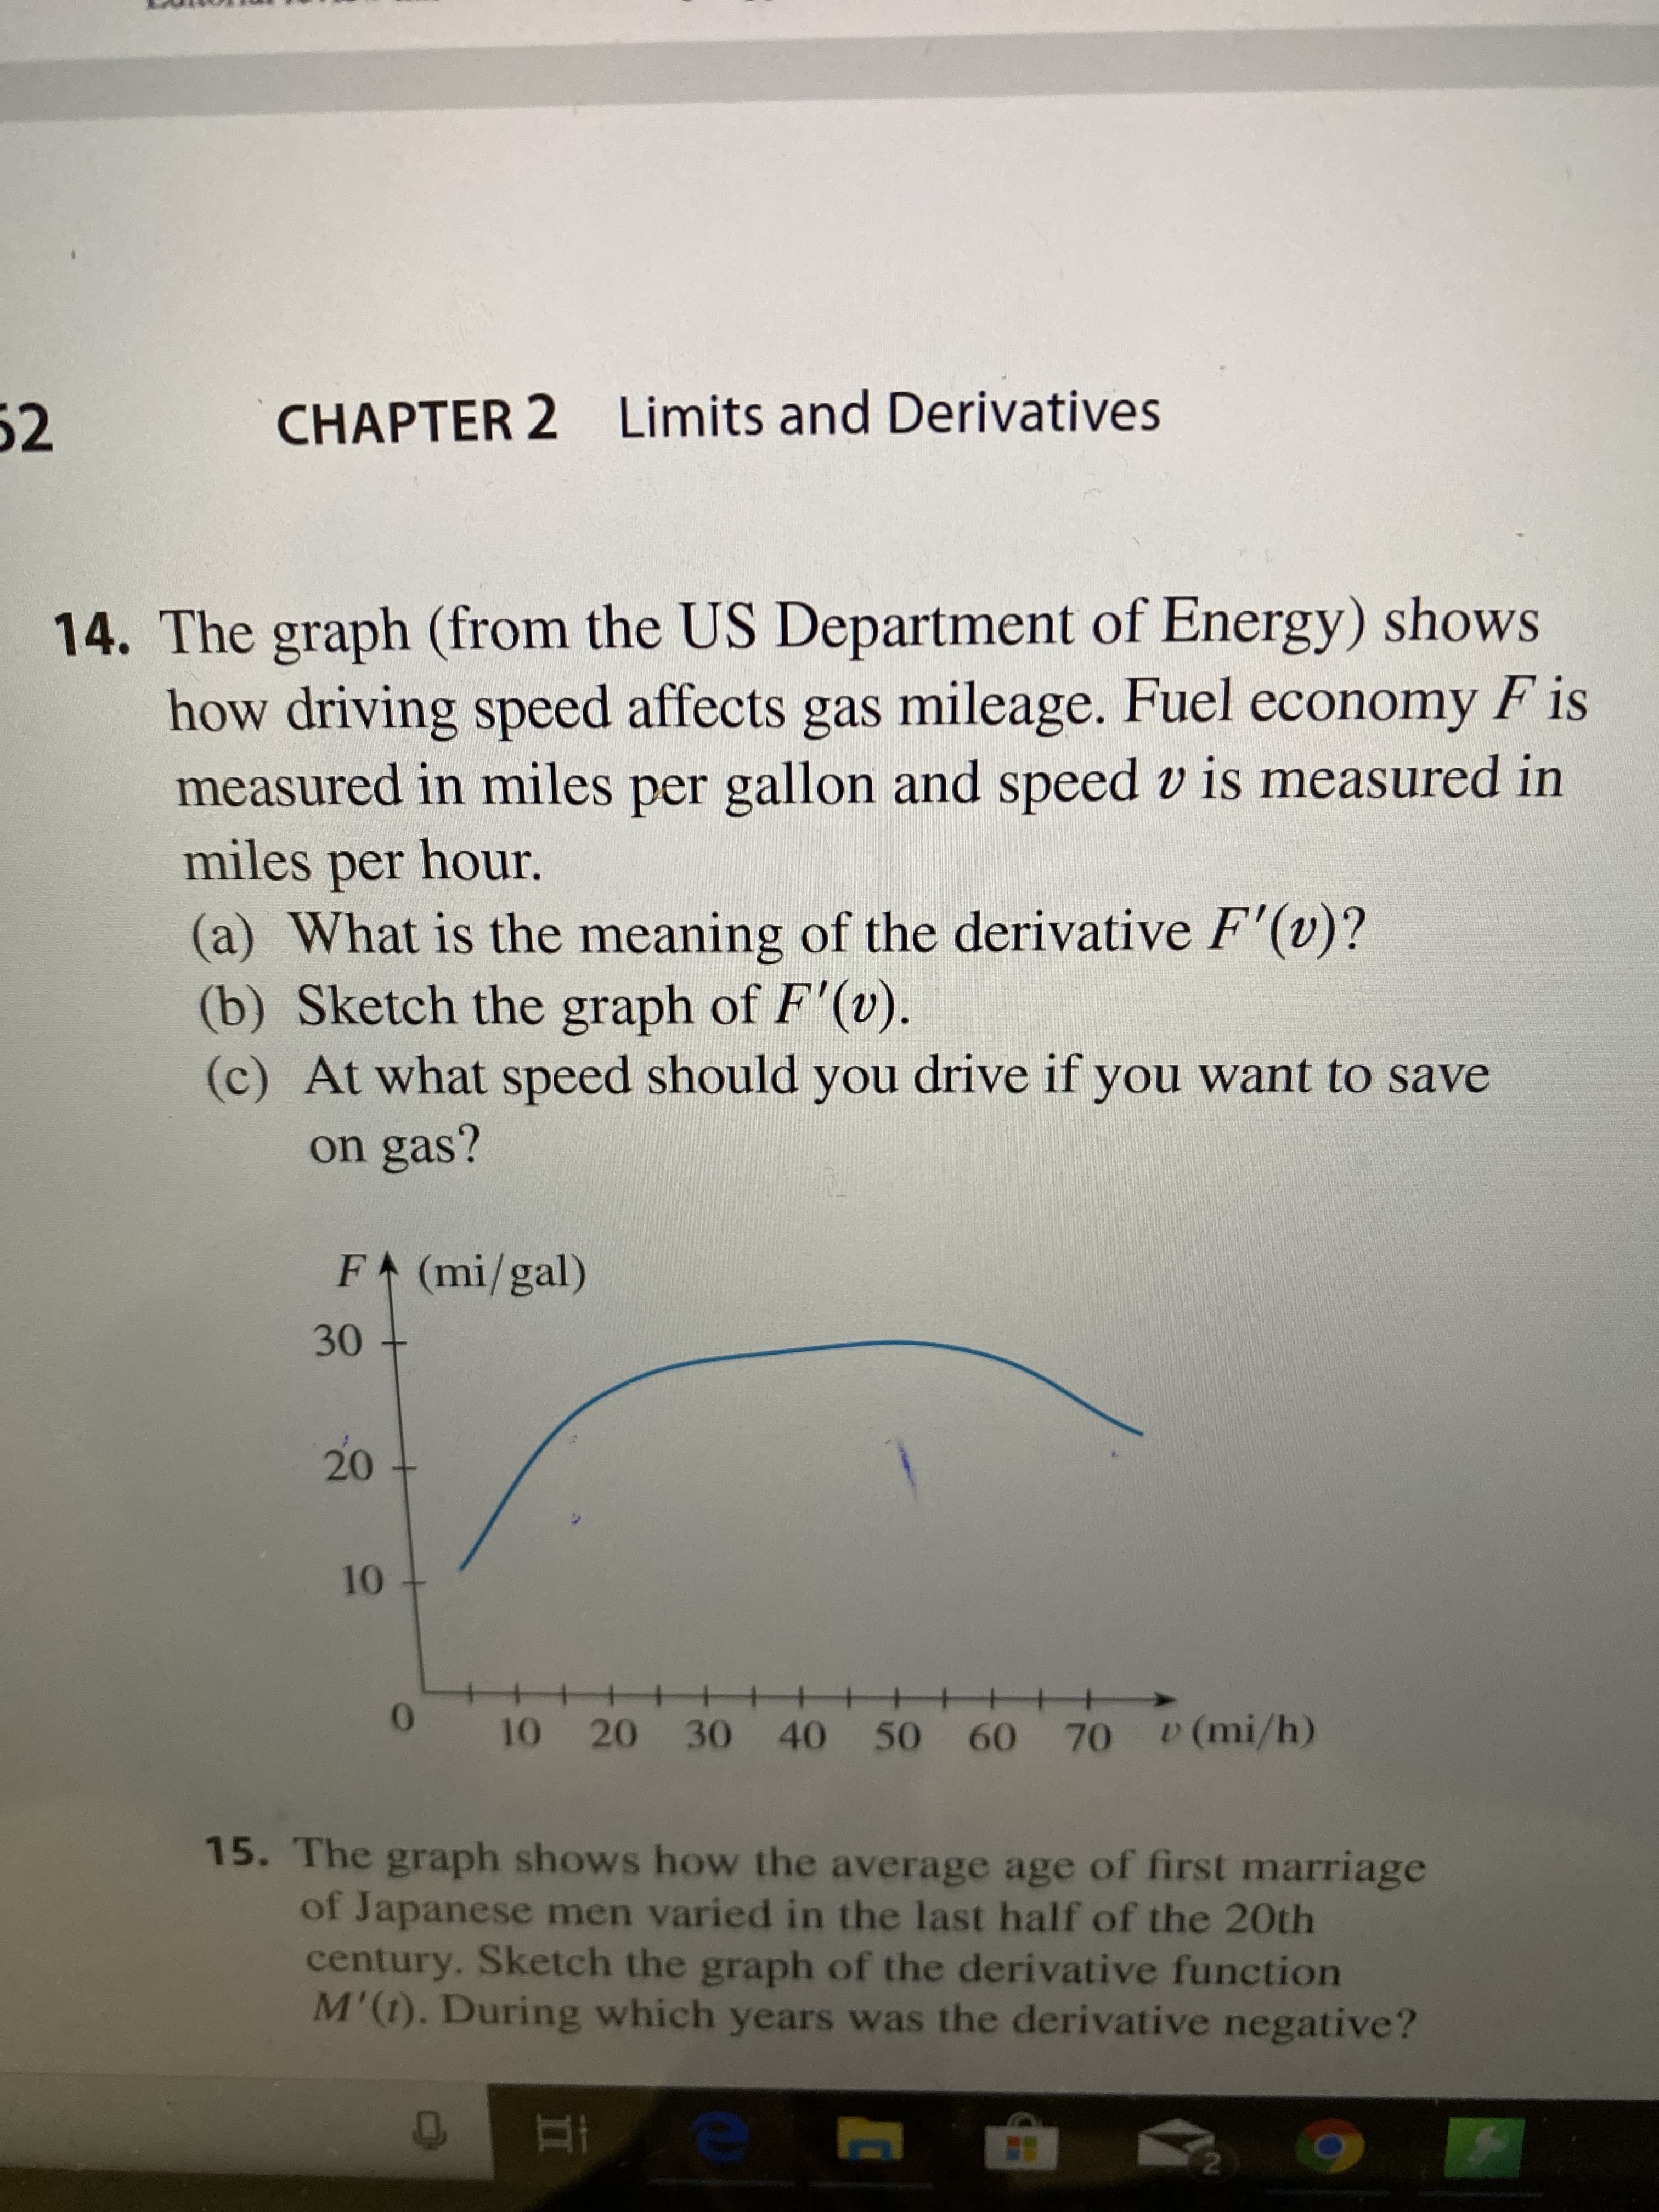 52
CHAPTER 2 Limits and Derivatives
14. The graph (from the US Department of Energy) shows
how driving speed affects gas mileage. Fuel economy F is
measured in miles per gallon and speed v is measured in
miles per hour.
(a) What is the meaning of the derivative F'(v)?
(b) Sketch the graph of F'(v).
(c) At what speed should you drive if you want to save
on gas?
F (mi/gal)
30
10
10 20 30 40 50 60 70 v(mi/h)
15. The graph shows how the average age of first marriage
of Japanese men varied in the last half of the 20th
century. Sketch the graph of the derivative function
M'(t). During which years was the derivative negative?
20
